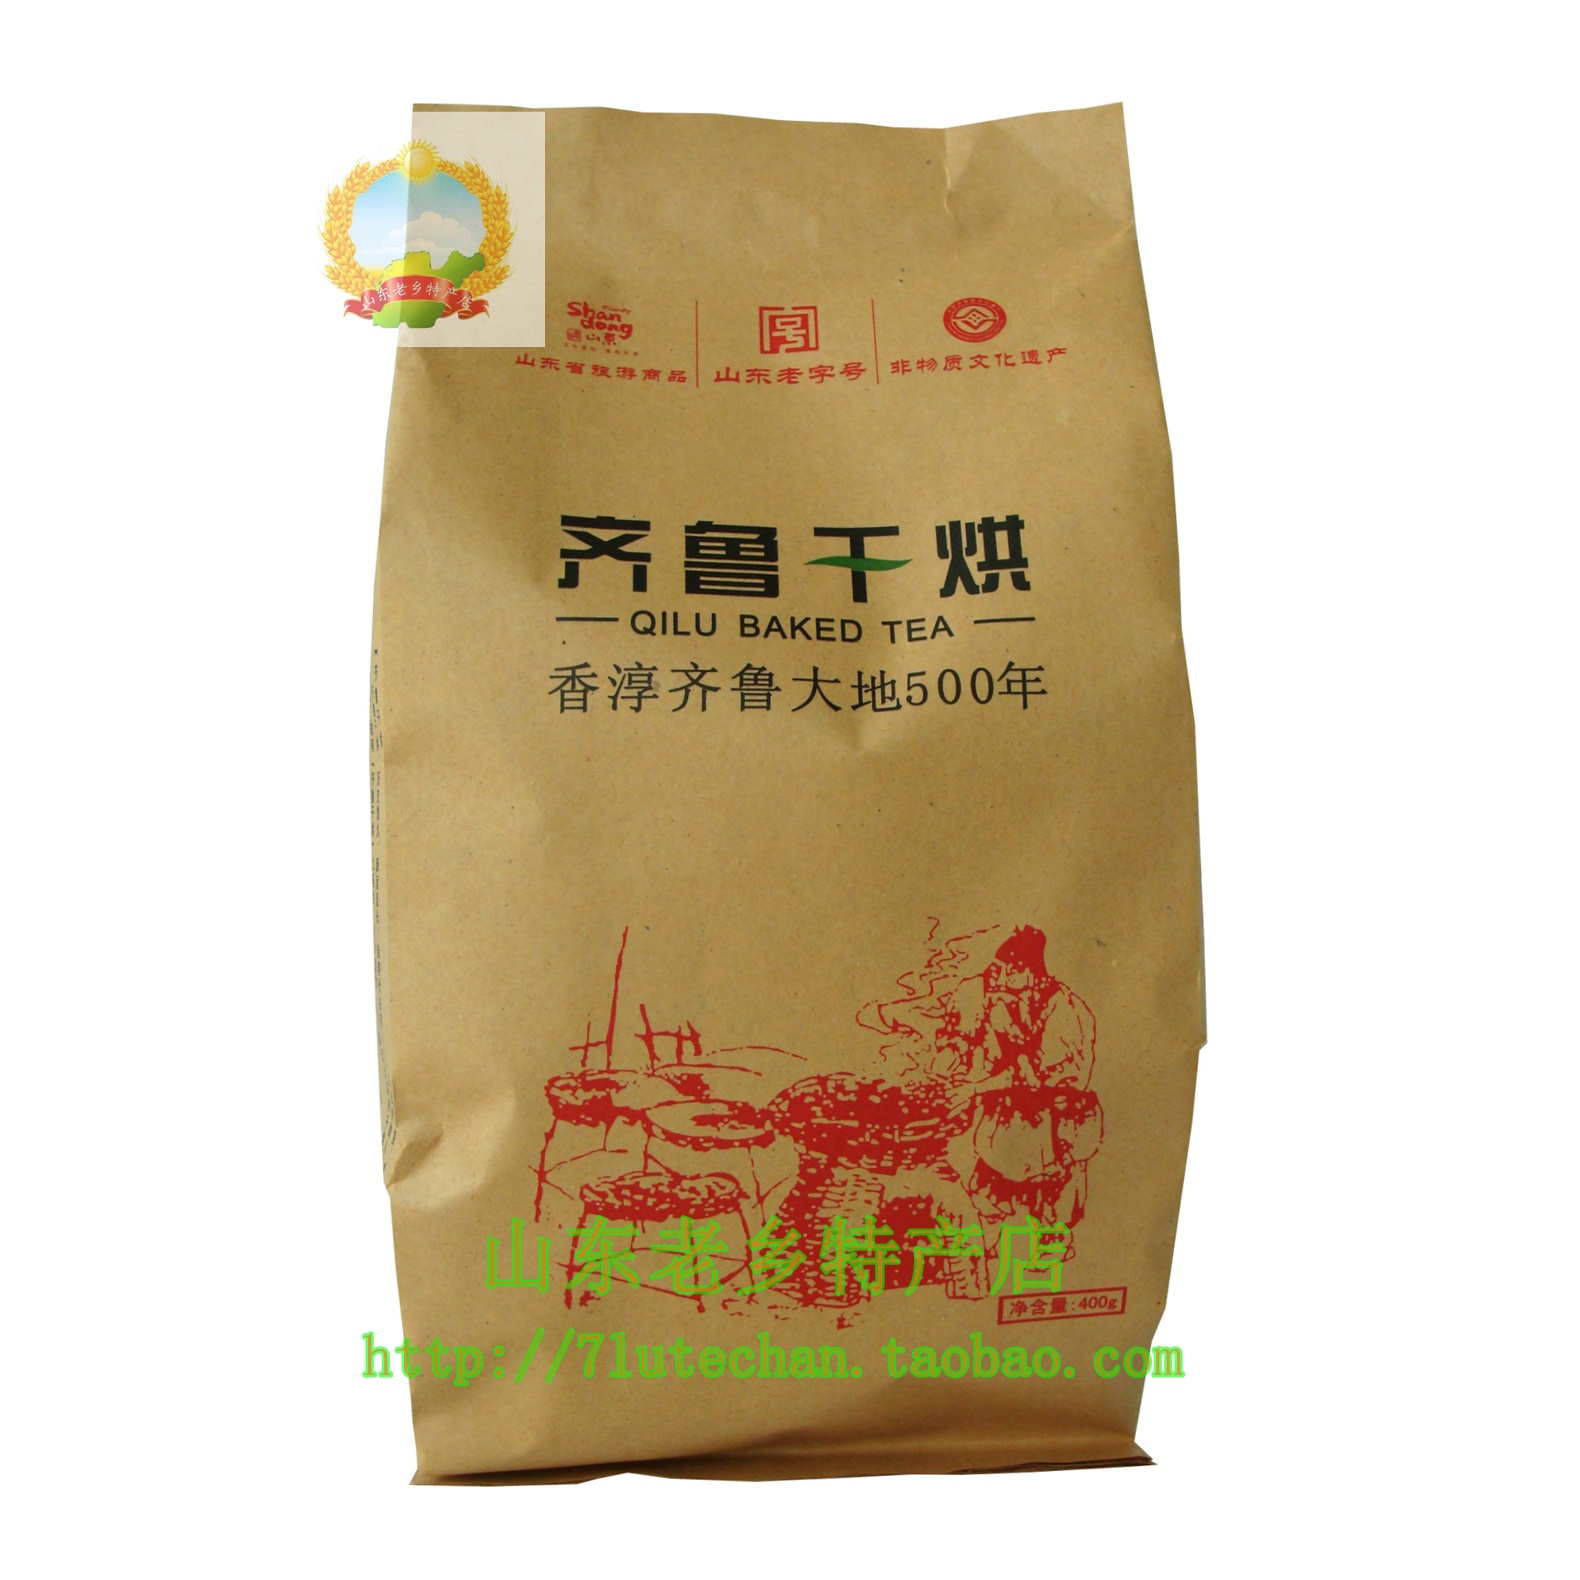 Shandong specialty Laiwu Old Dry Baked Qilu Dry Baked Yellow Tea Tea Special Gong Tea 2 Packages Mail Shandong Province